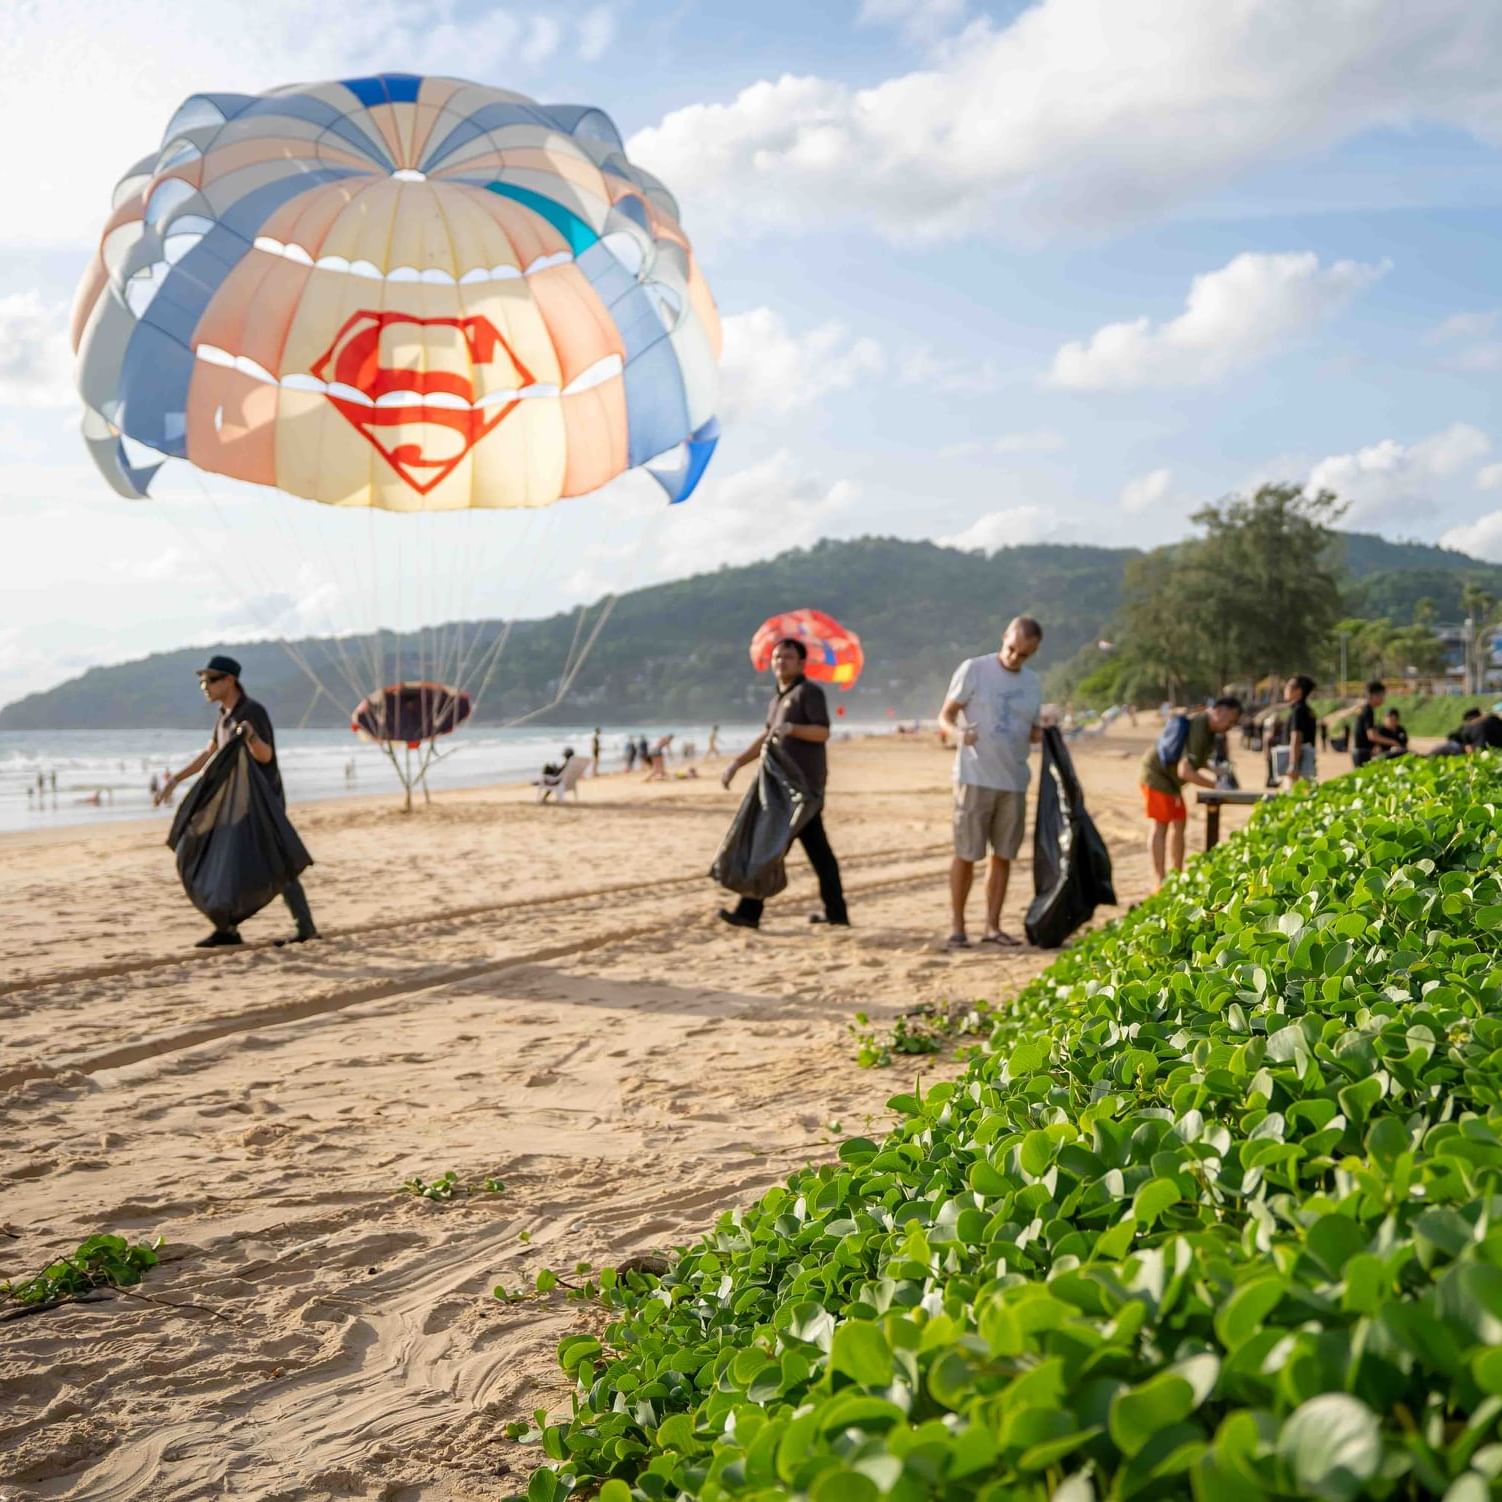 Paradox Resort Phuket staff is cleaning the beach right now.